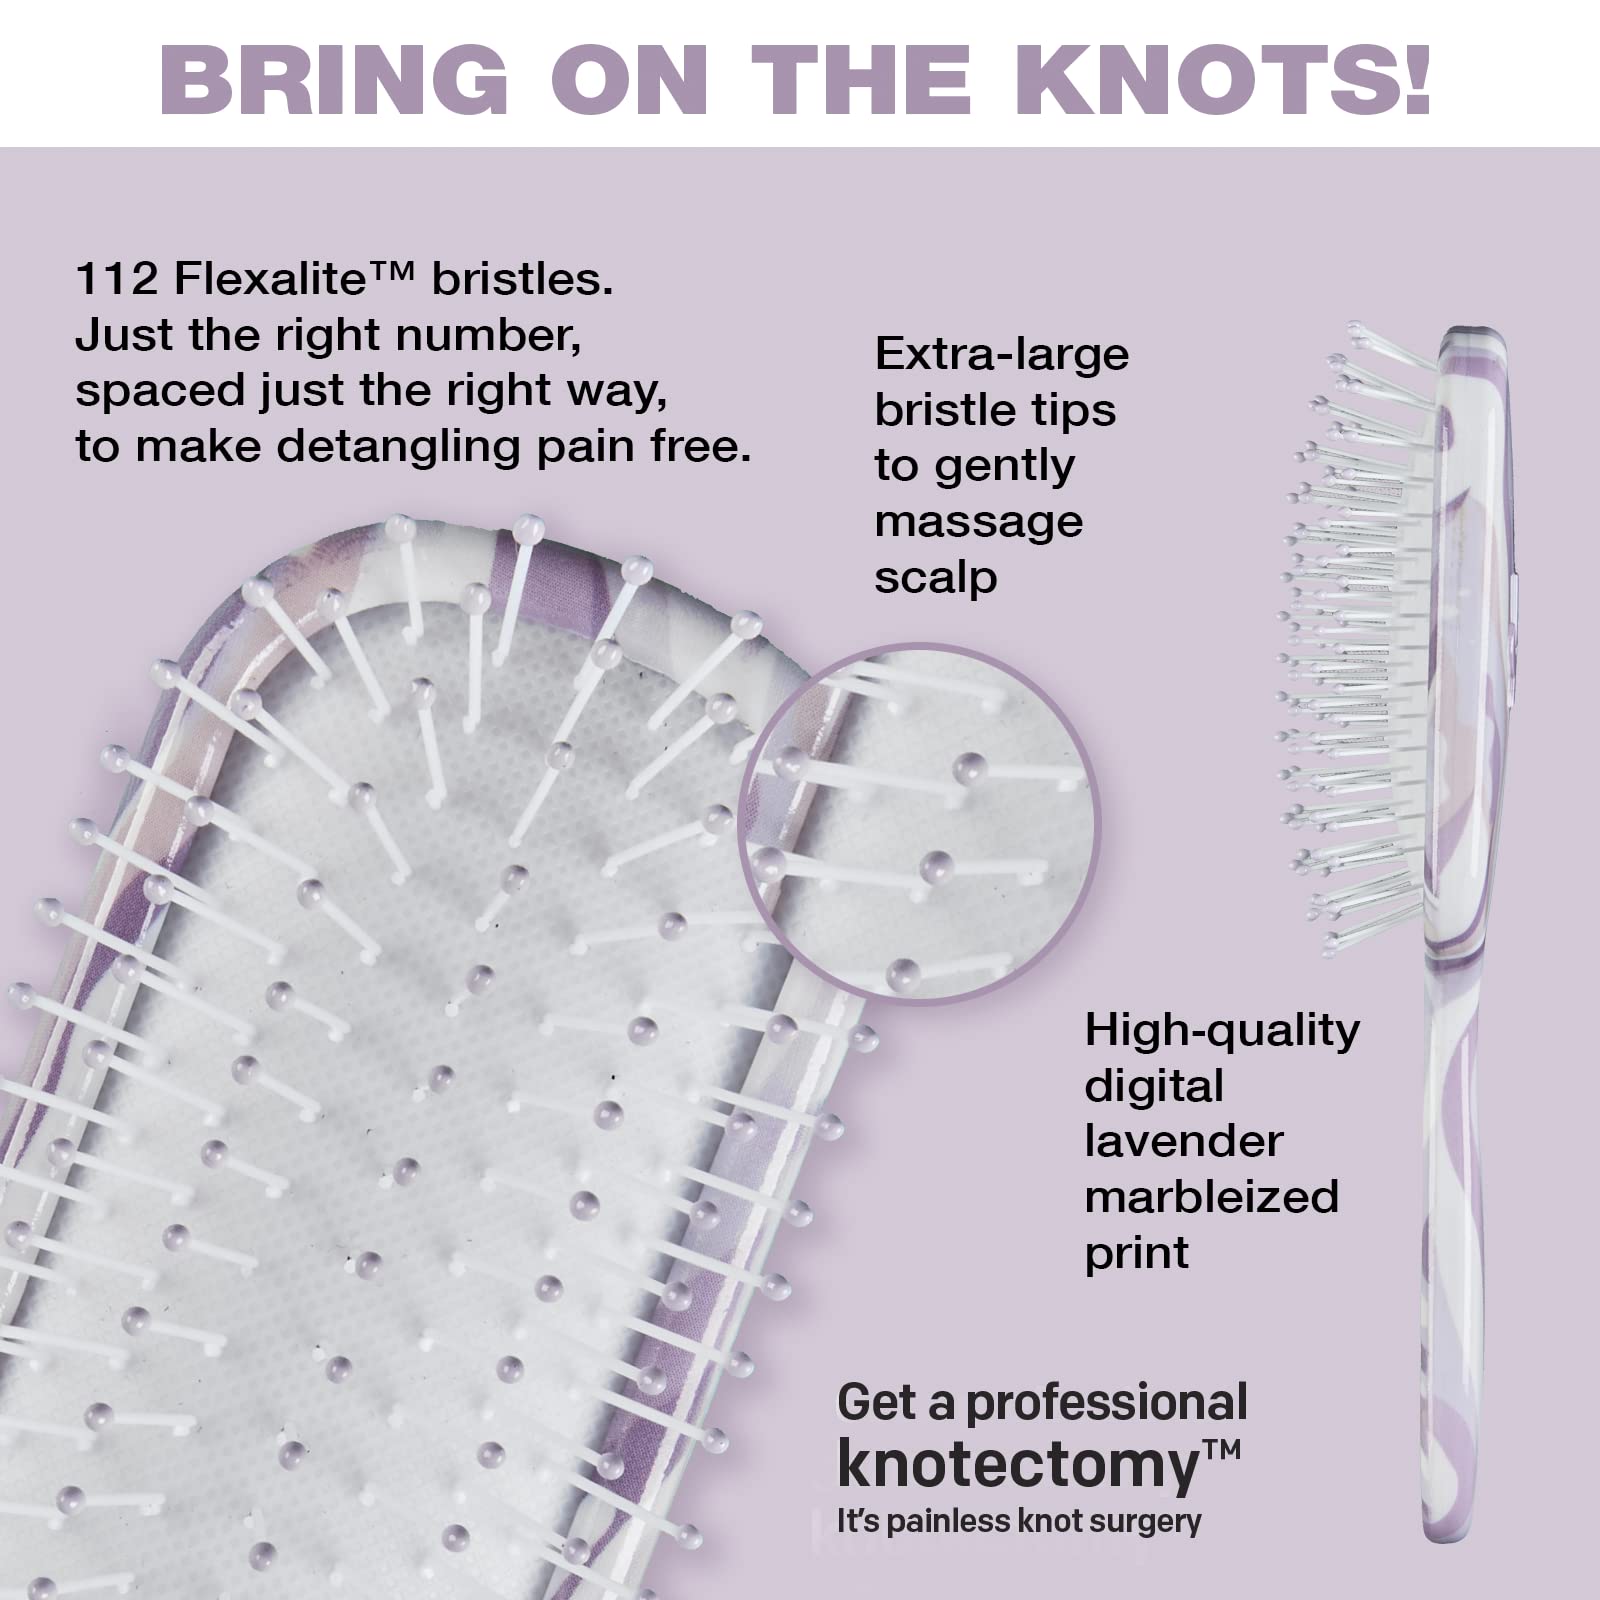 The Knot Dr. for Conair Mini Hair Brush, Wet and Dry Detangler with Clear Storage Case, Removes Knots and Tangles, For All Hair Types, Marblized Lavender Print